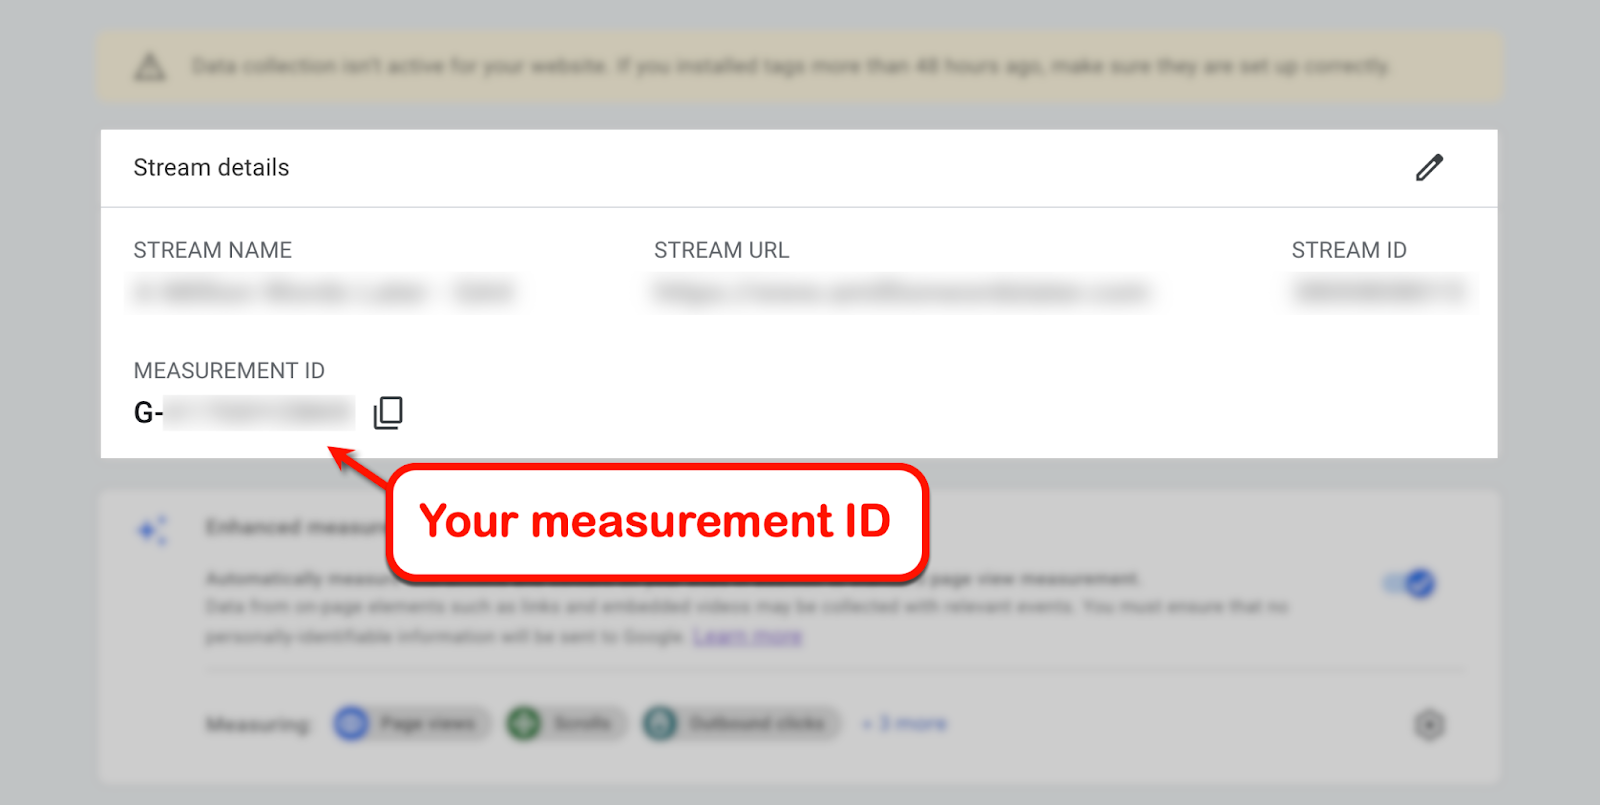 Image where you can find the measurement ID